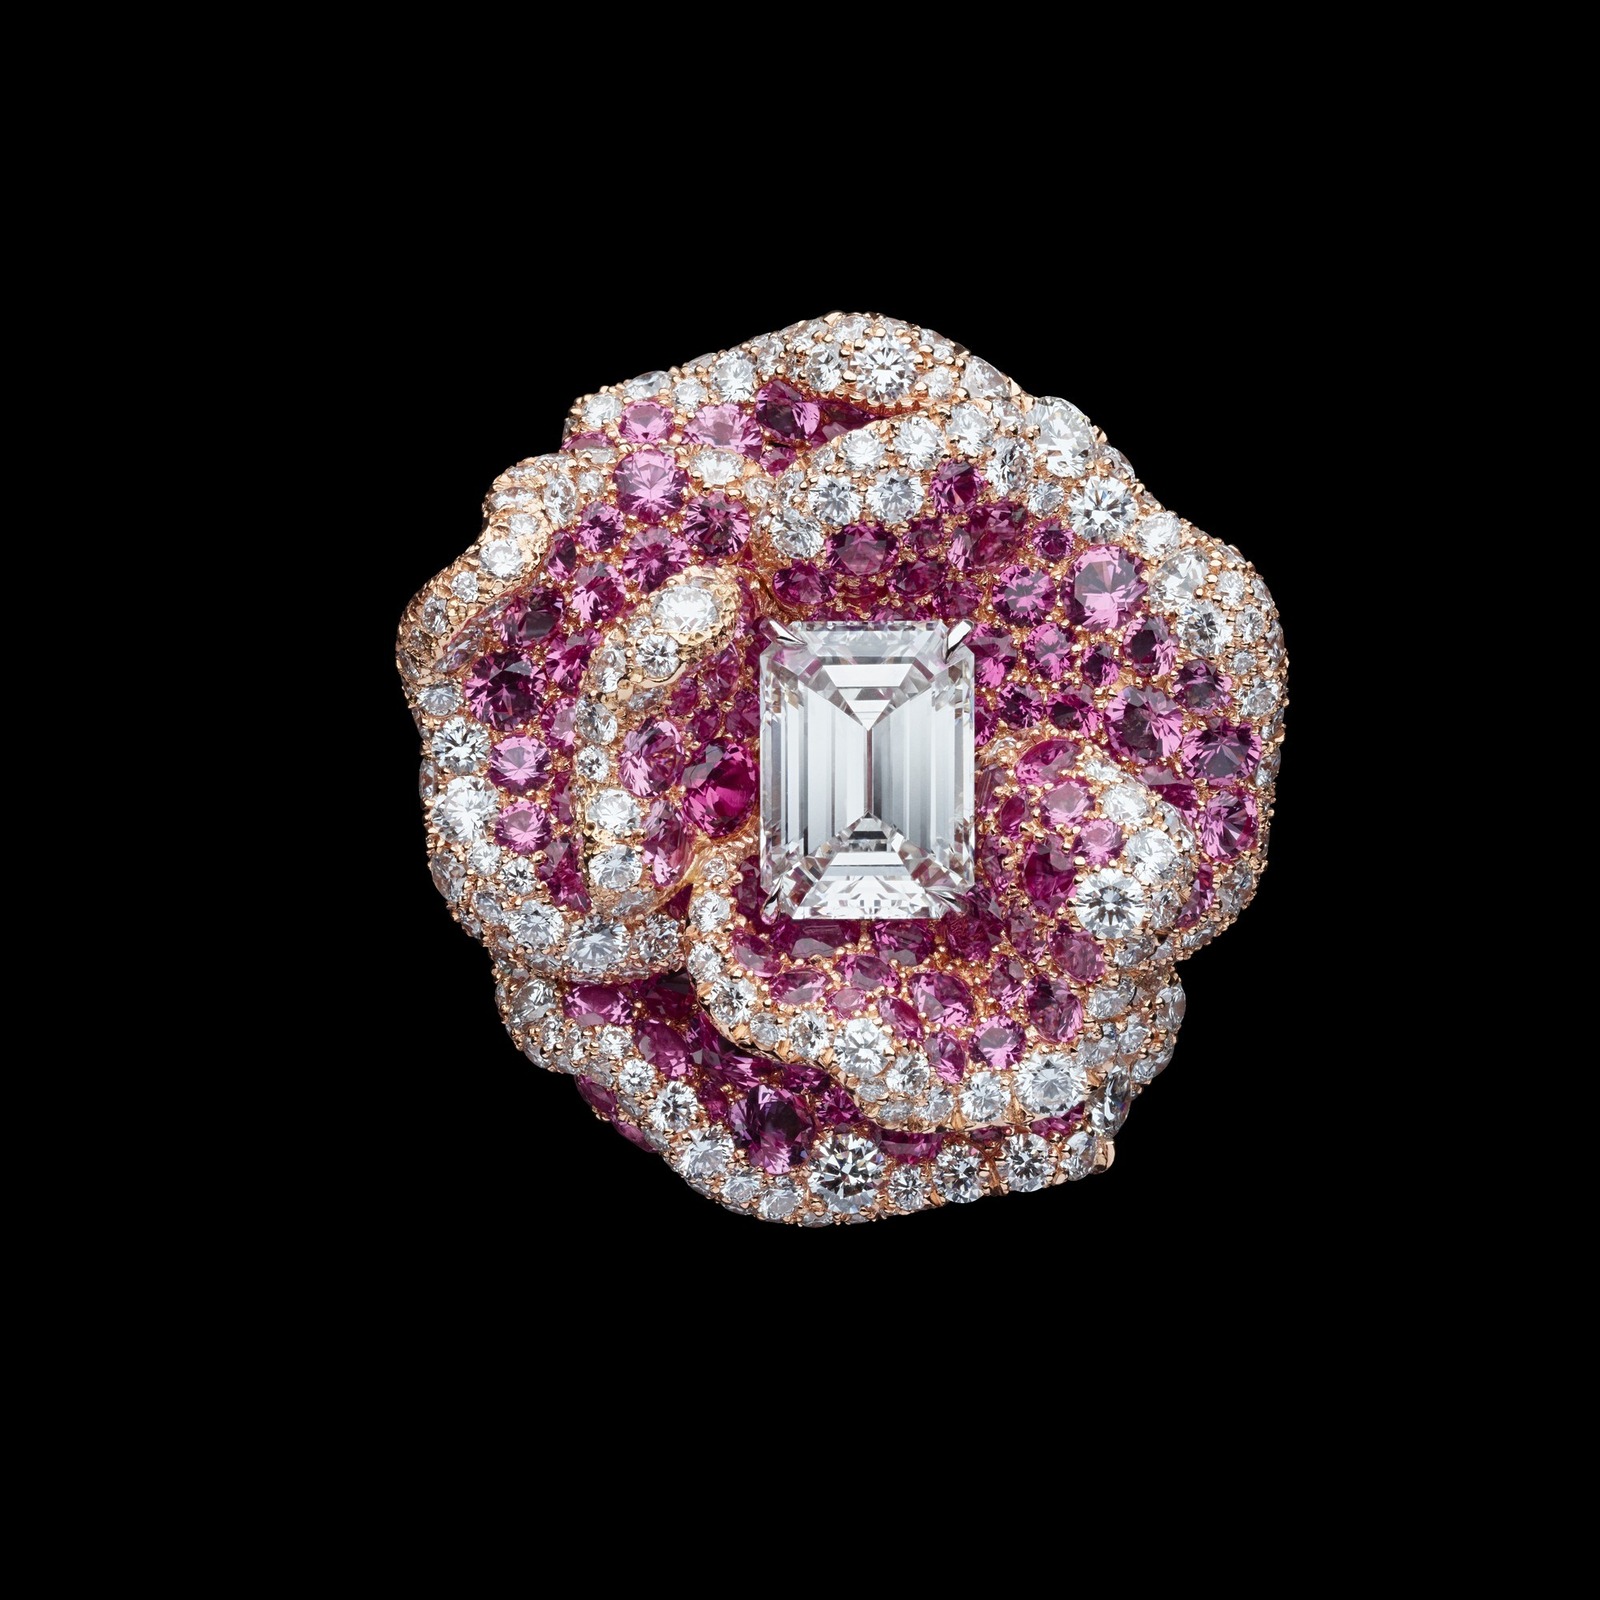 Dior revealed the new high jewelry collection RoseDior